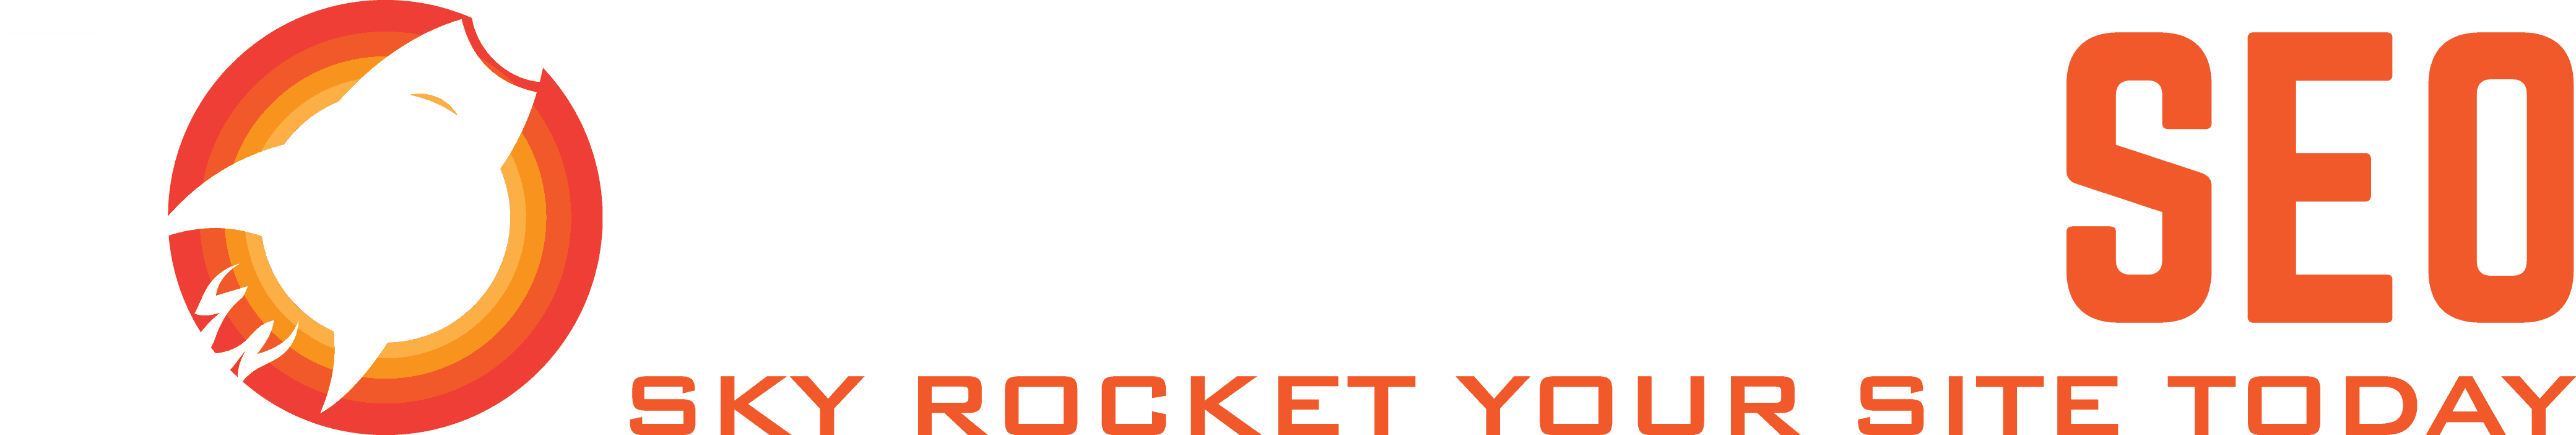 Sky Rocket Your Site Today